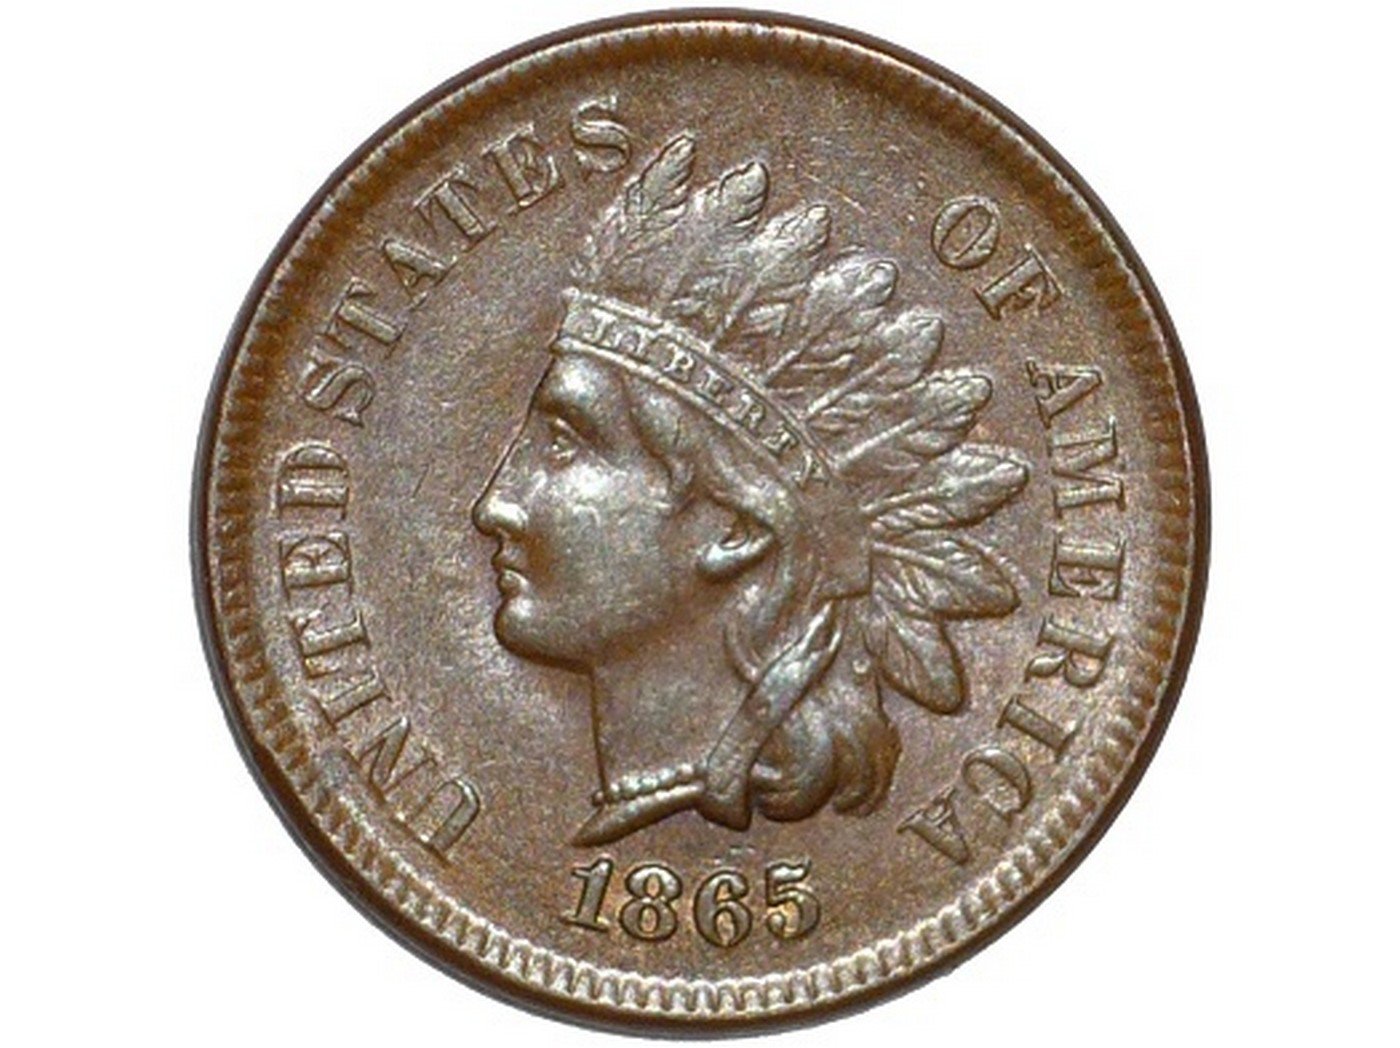 1865 Obverse of Fancy 5 ODD-001 - Indian Head Penny - Photo by David Poliquin